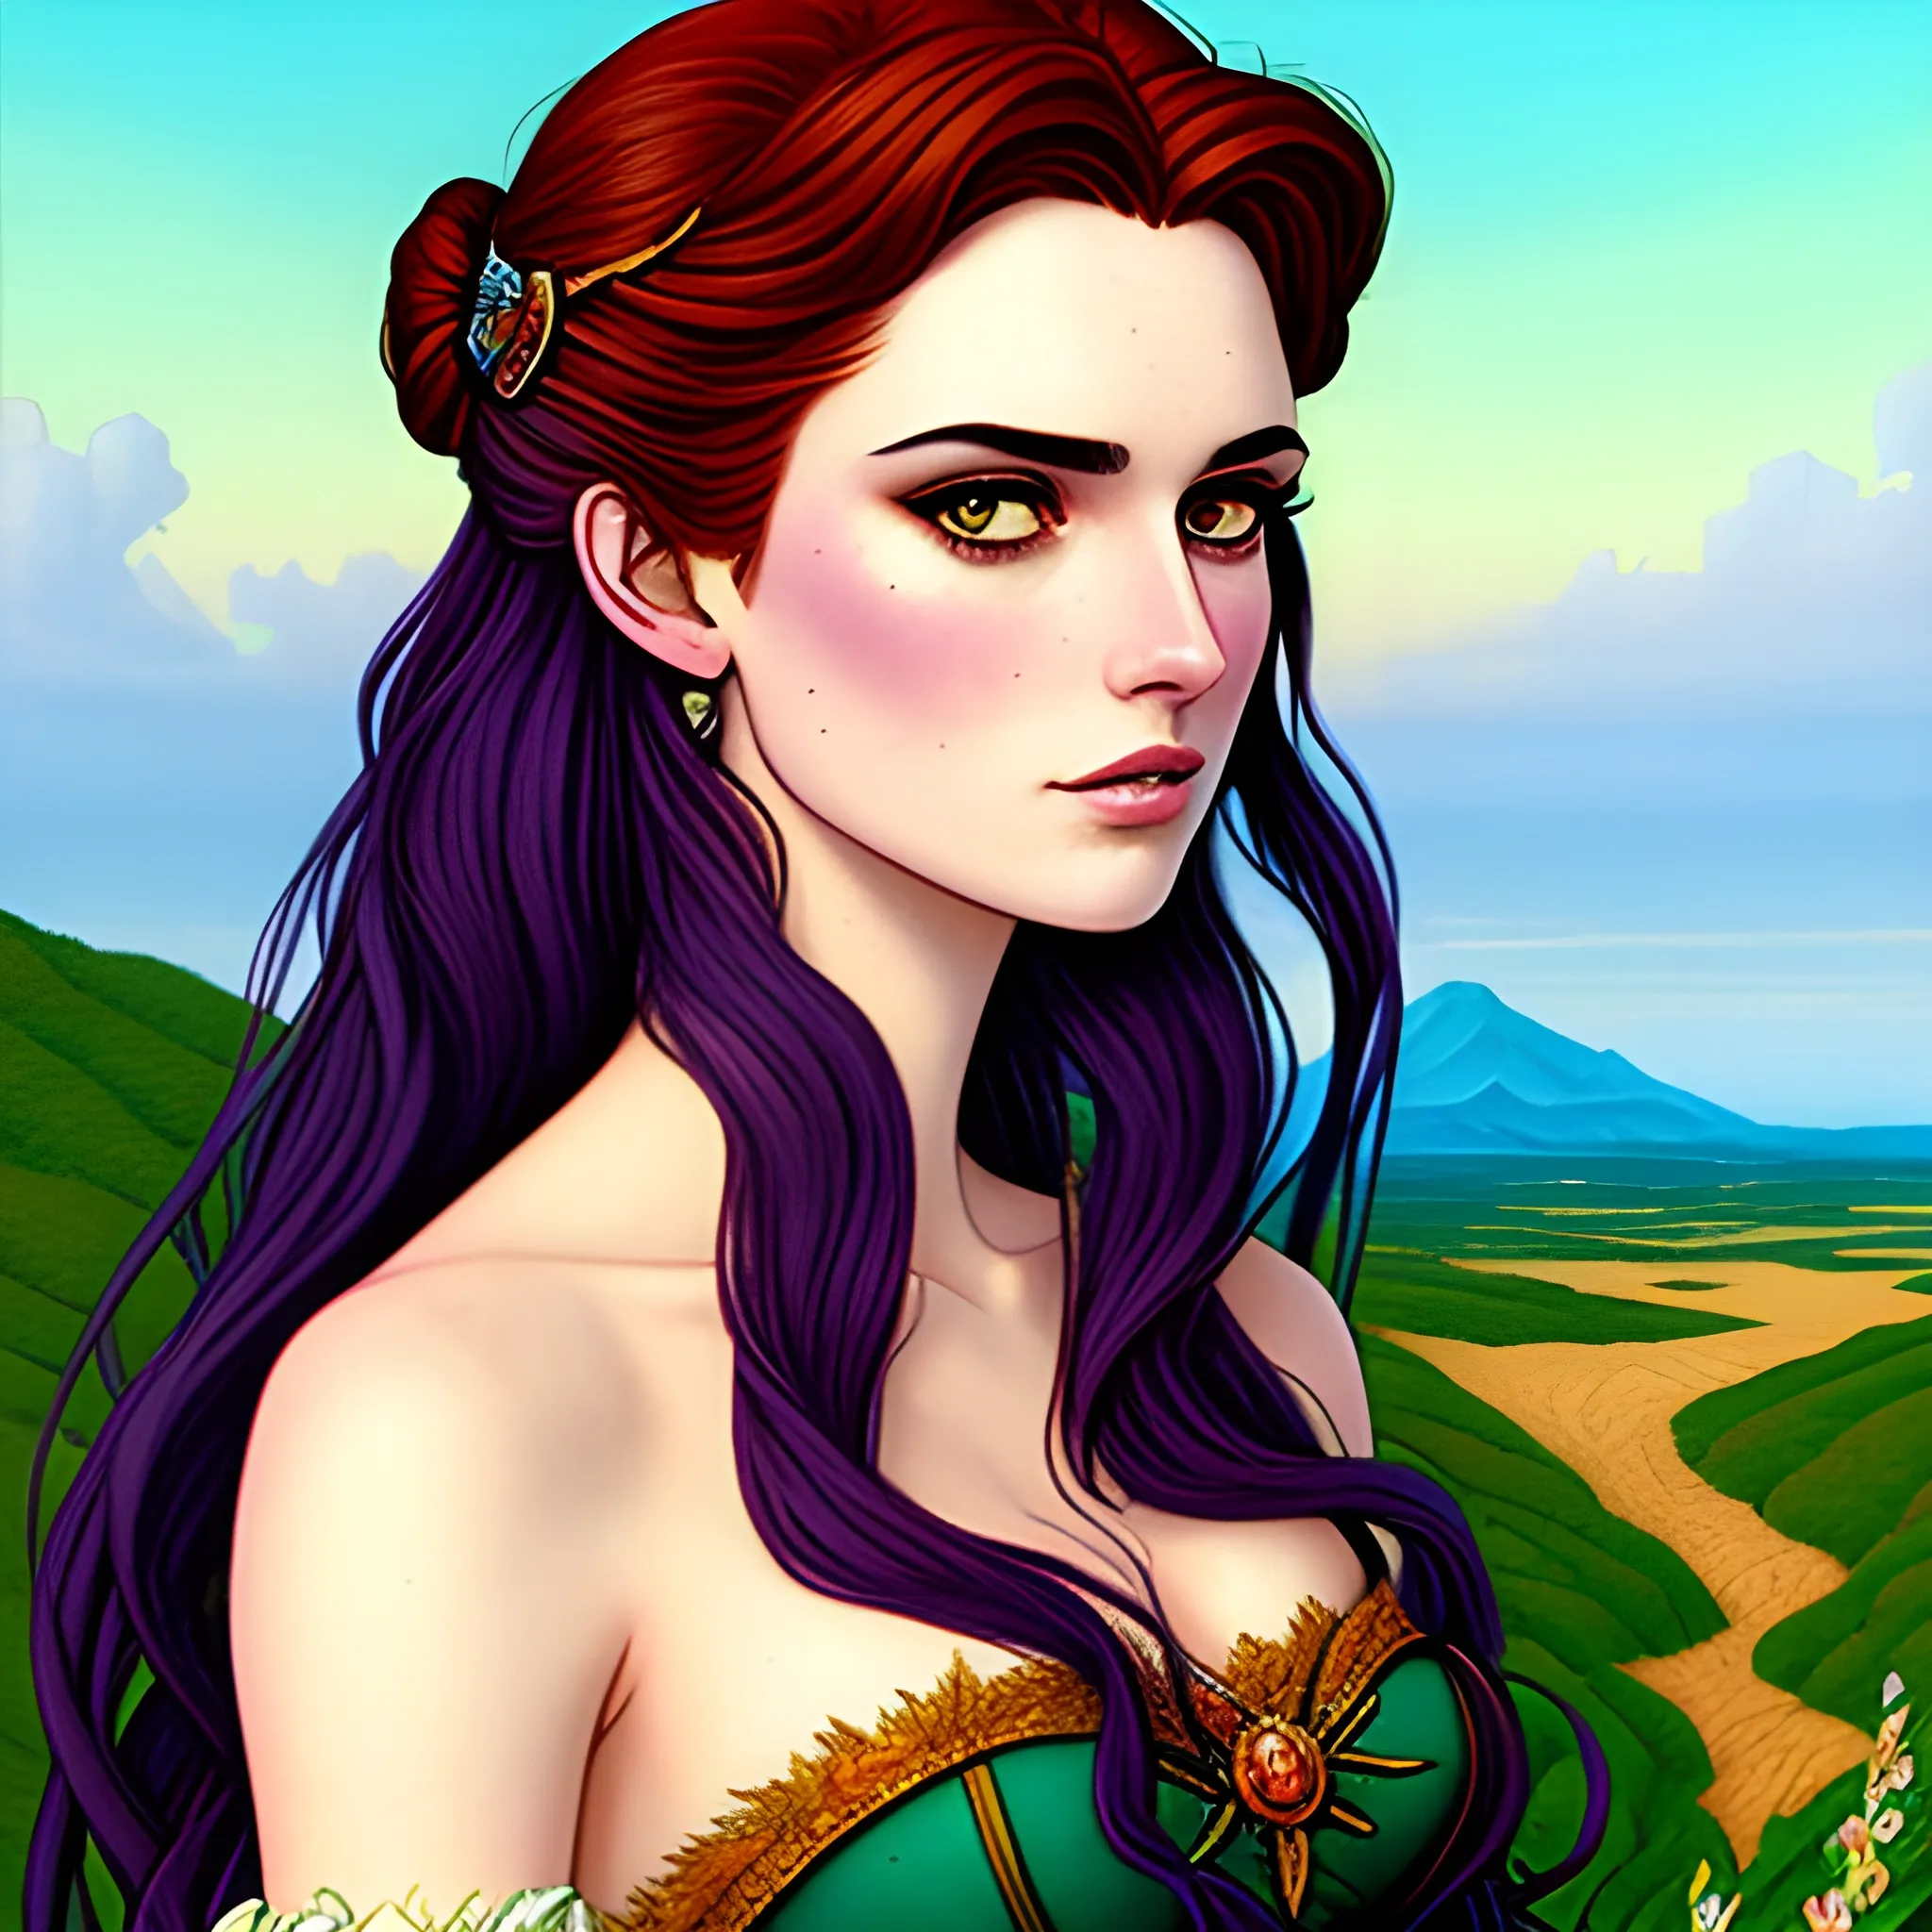 a girl  sweet young princess, fae, looks like mix of Lana Del Rey and grimes, cool hair, in the style of Jean Giraud illustration, and shoujo manga, inspired by pre raphaelite painting, chromatic